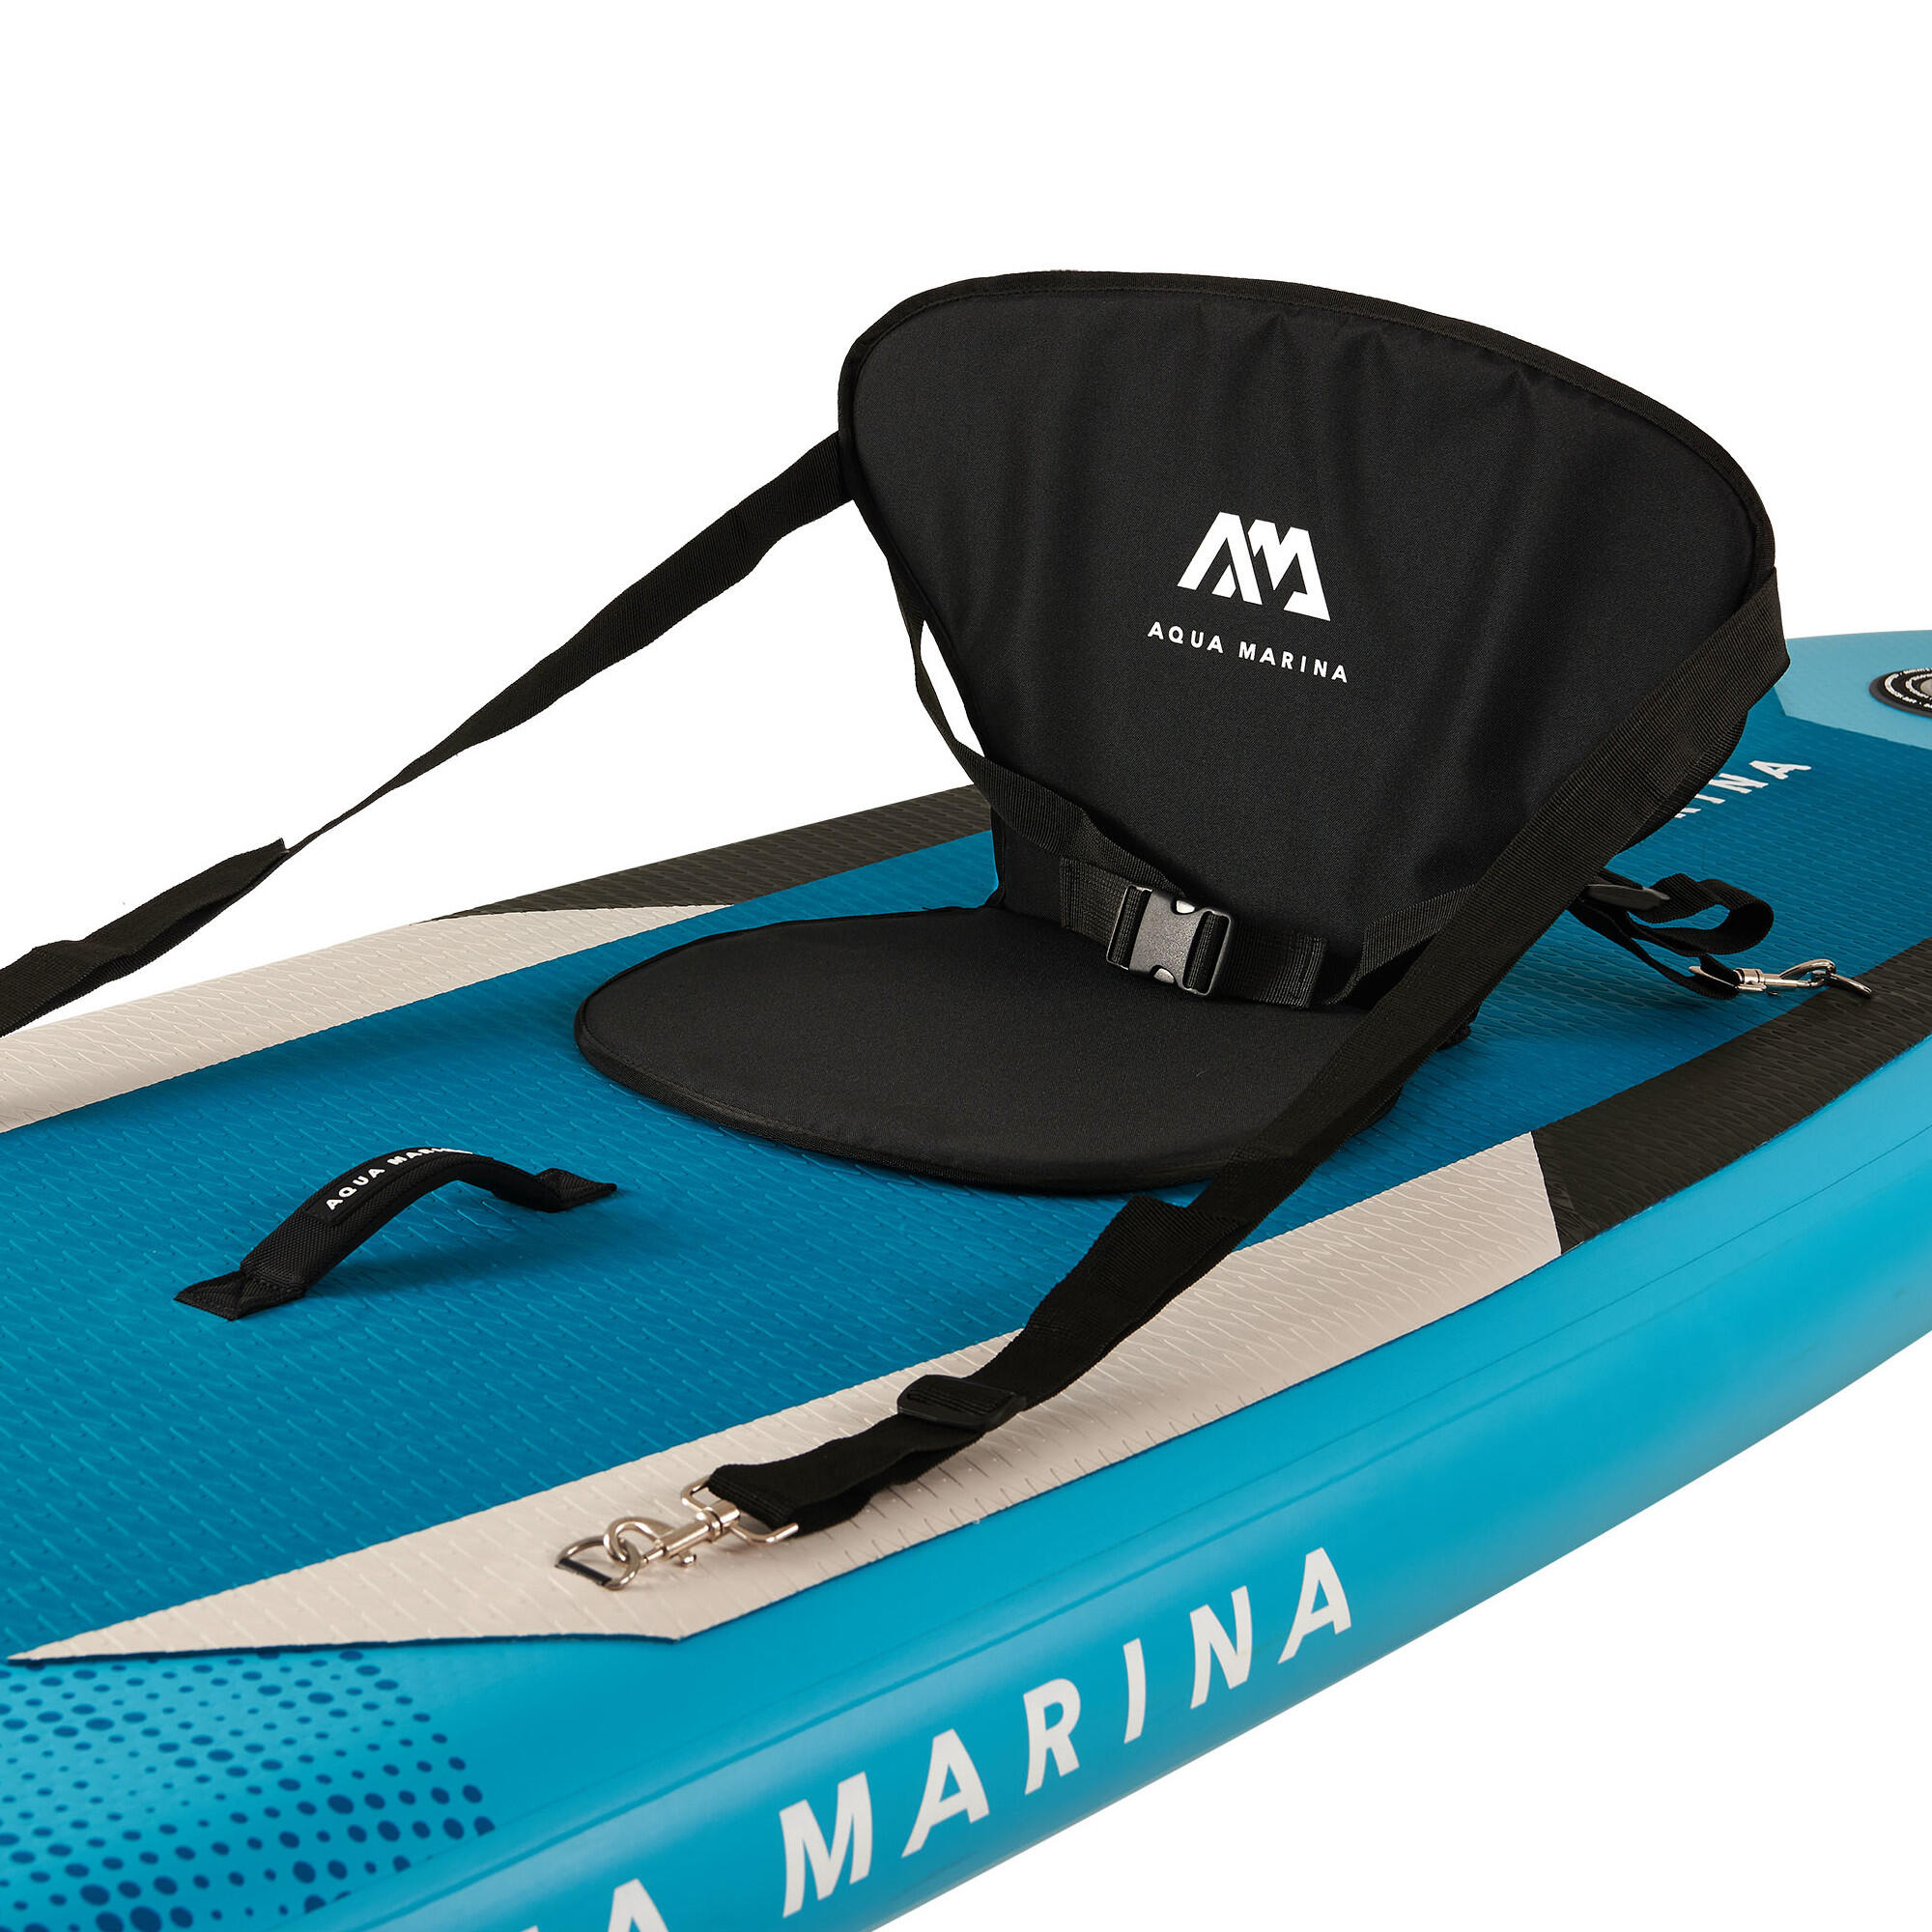 Aqua Marina Vapor stand-up paddle board package 10ft4/315cm 4/16